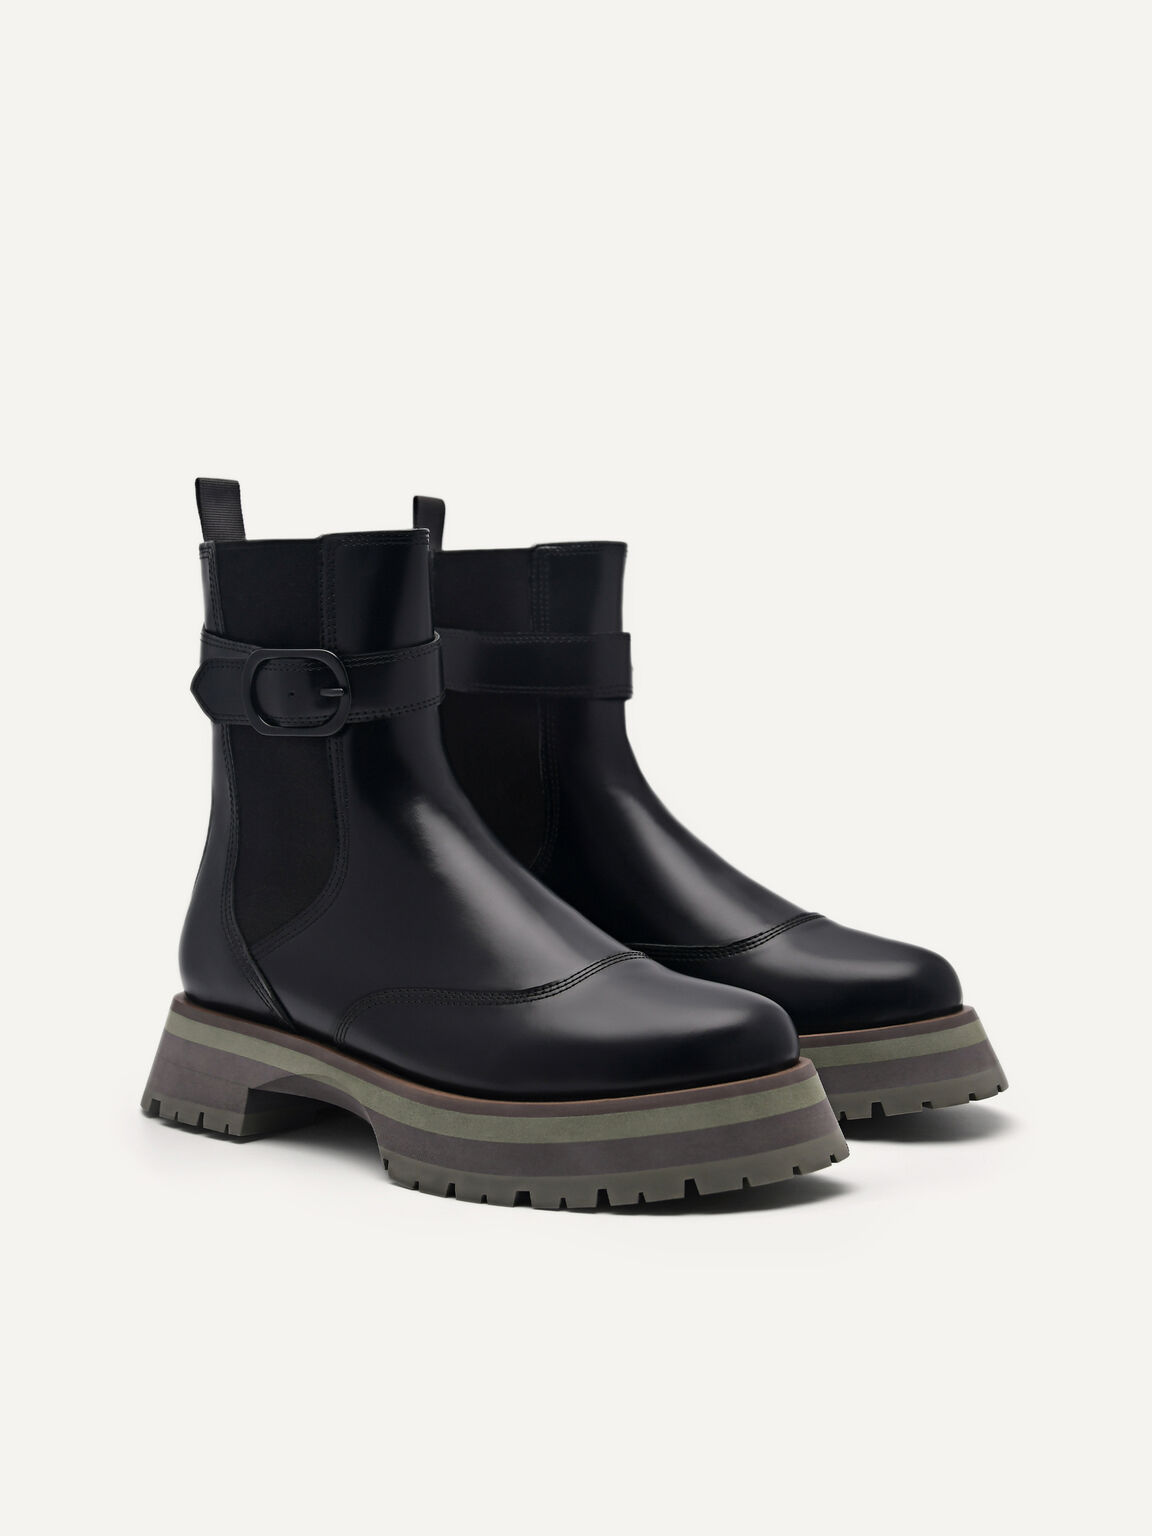 Leather Buckled Chelsea Boots, Black